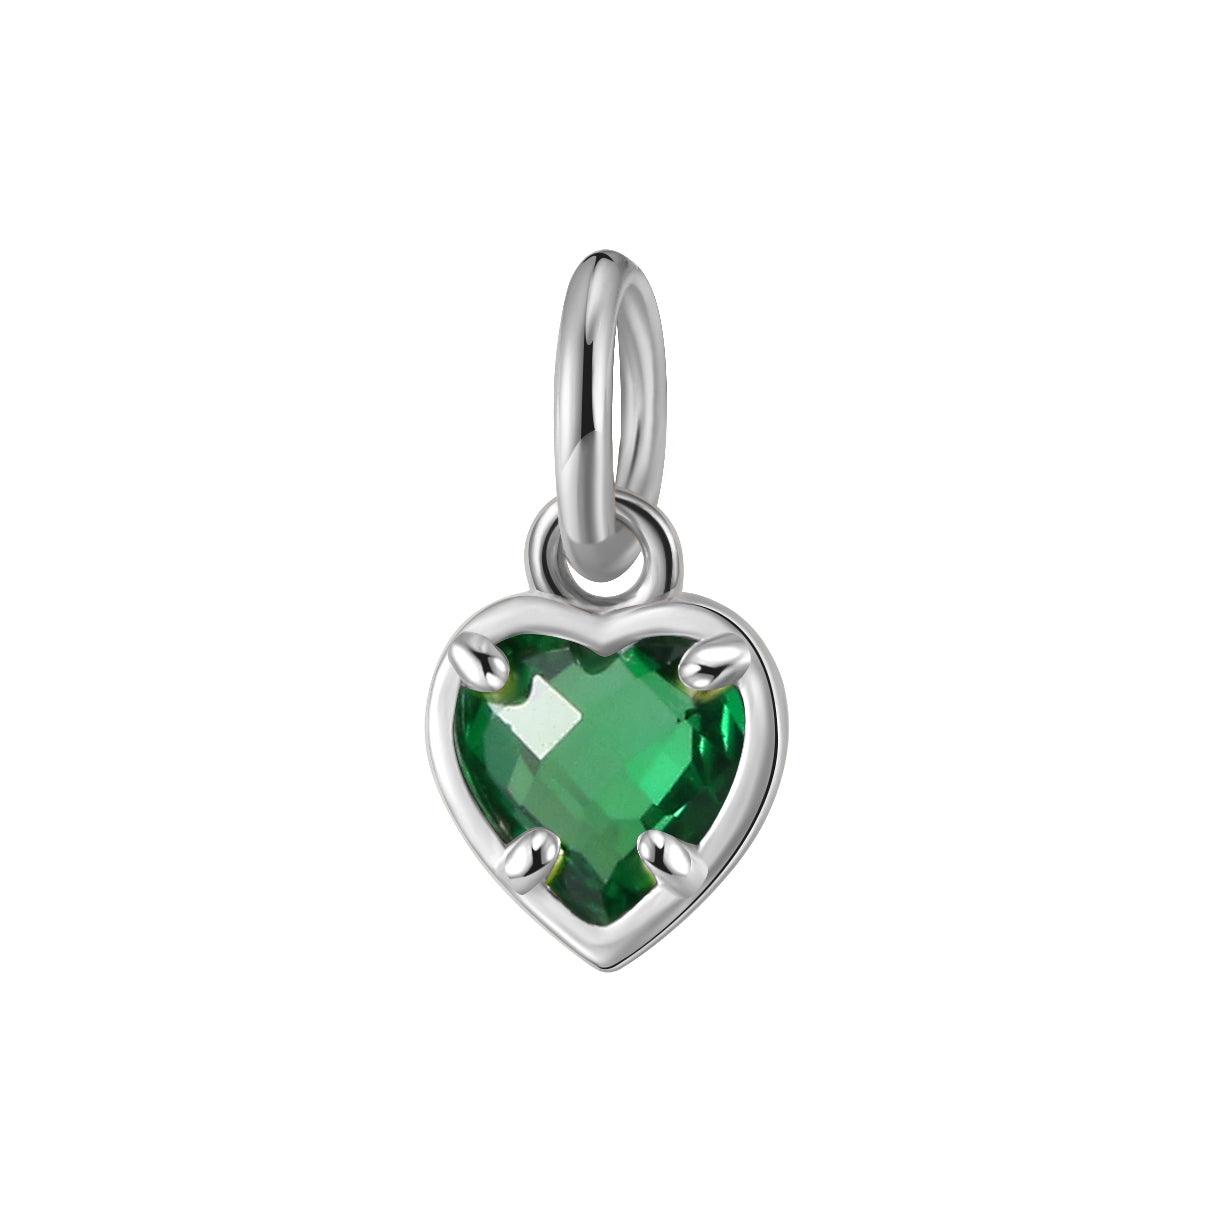 Birthstone Charm - Findings & Connections